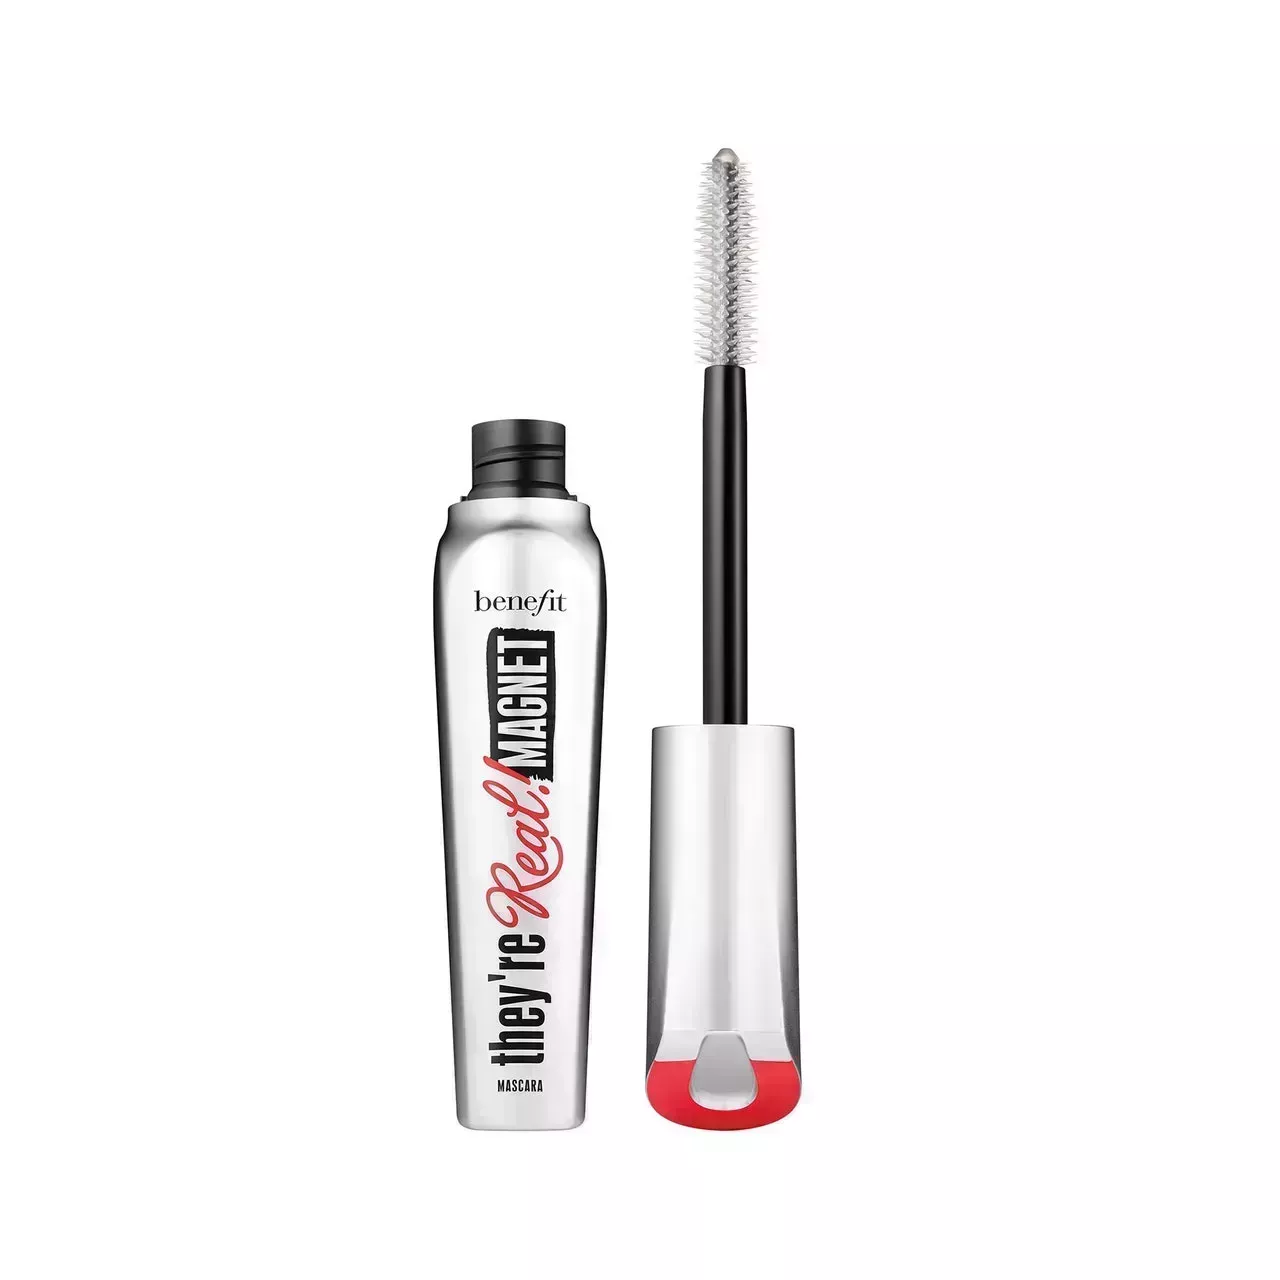 Benefit Cosmetics They're Real! Magnet Extreme Lengthening Mascara silver tube of mascara and brush on white background